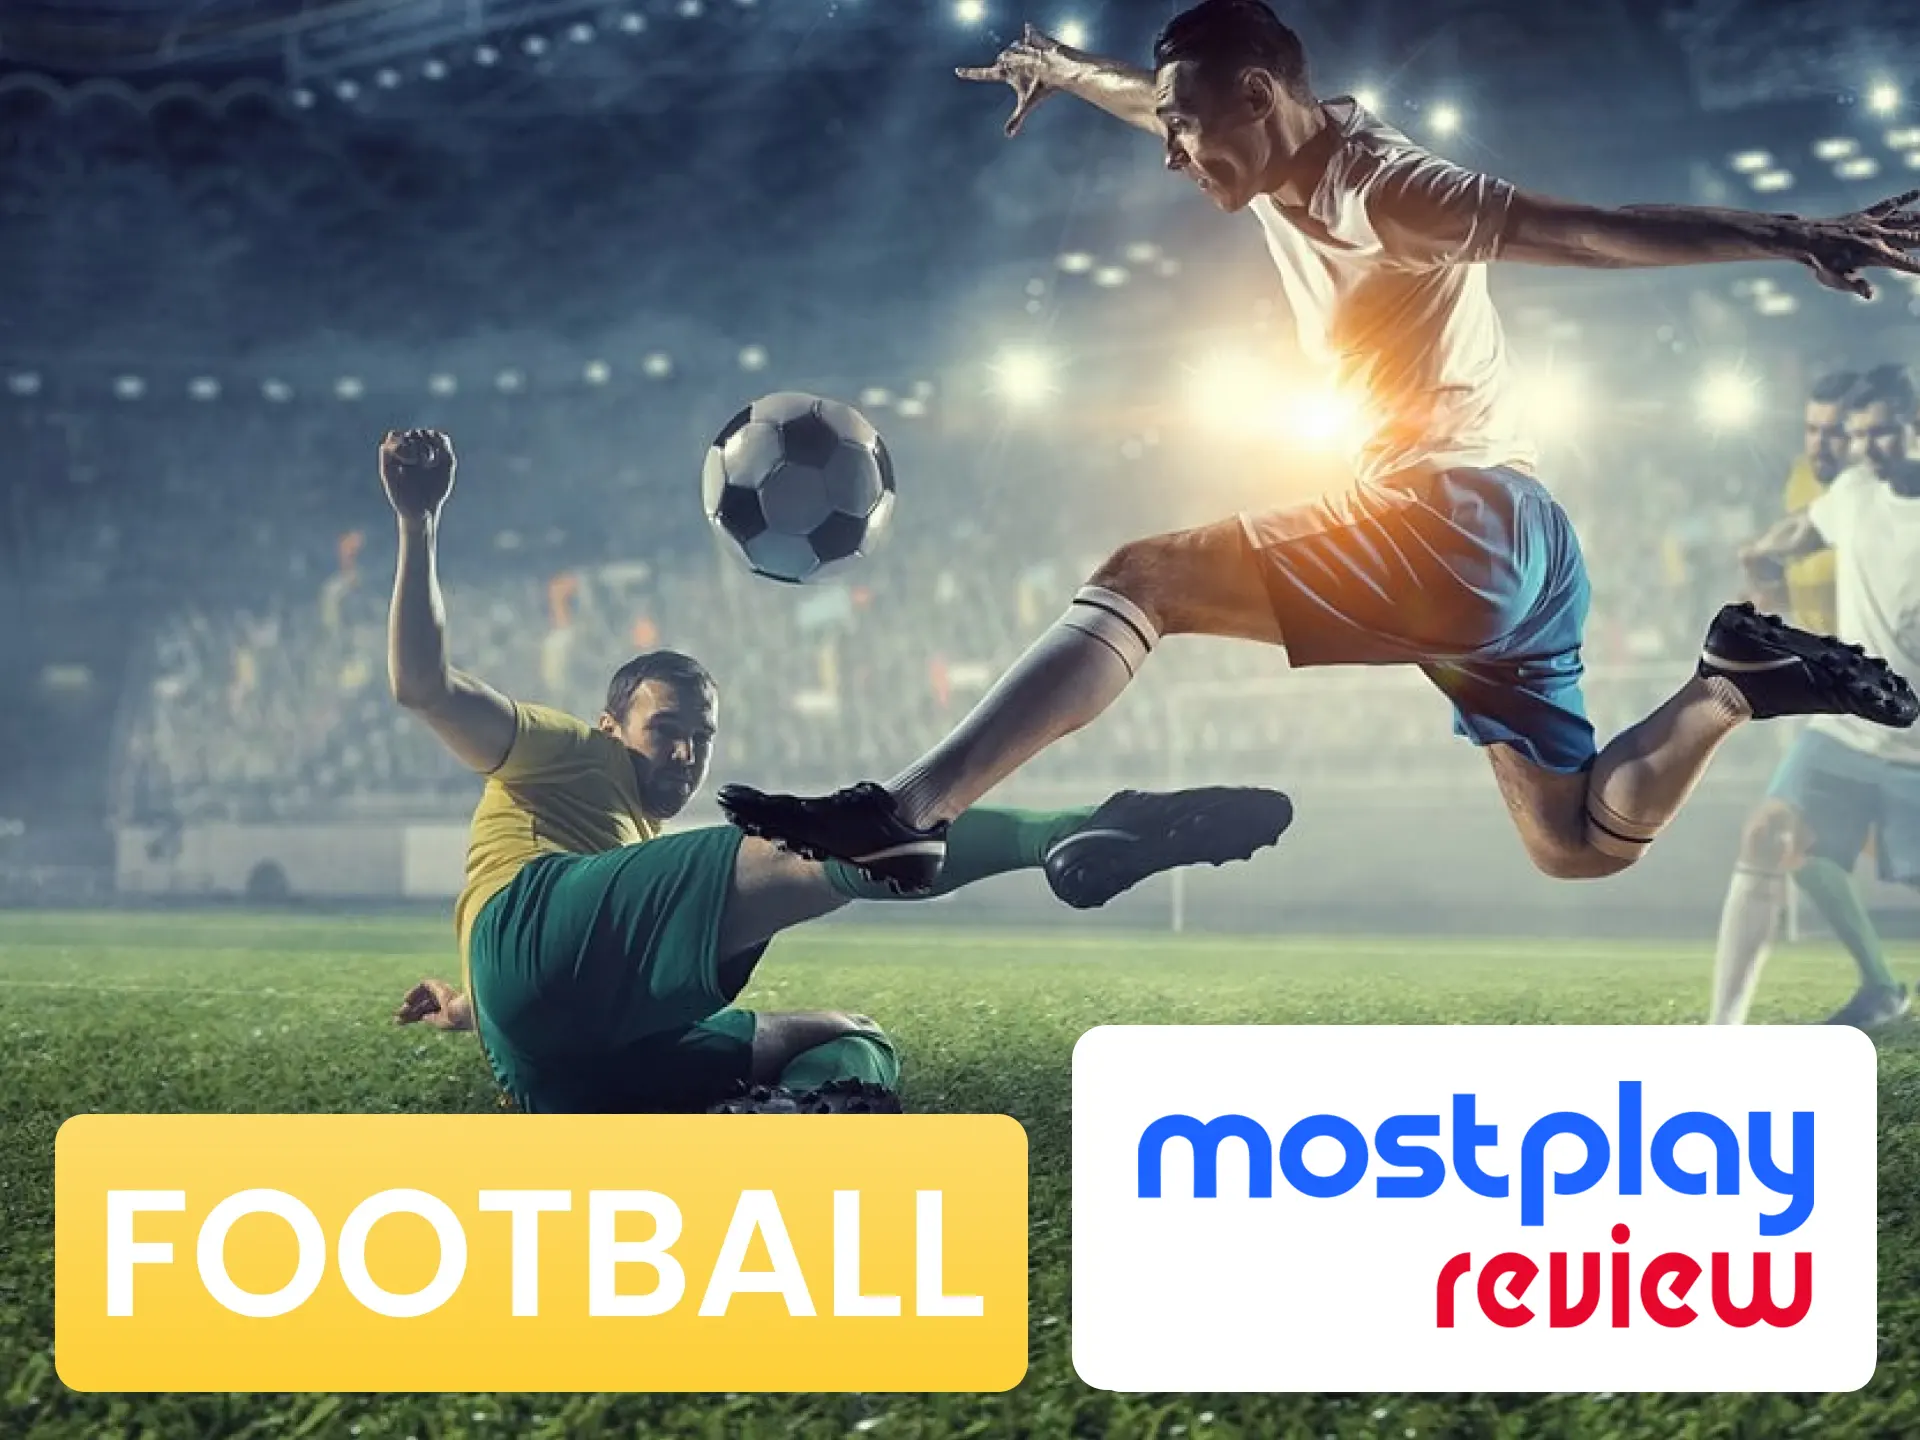 Bet on the most popular football matches at Mostplay.